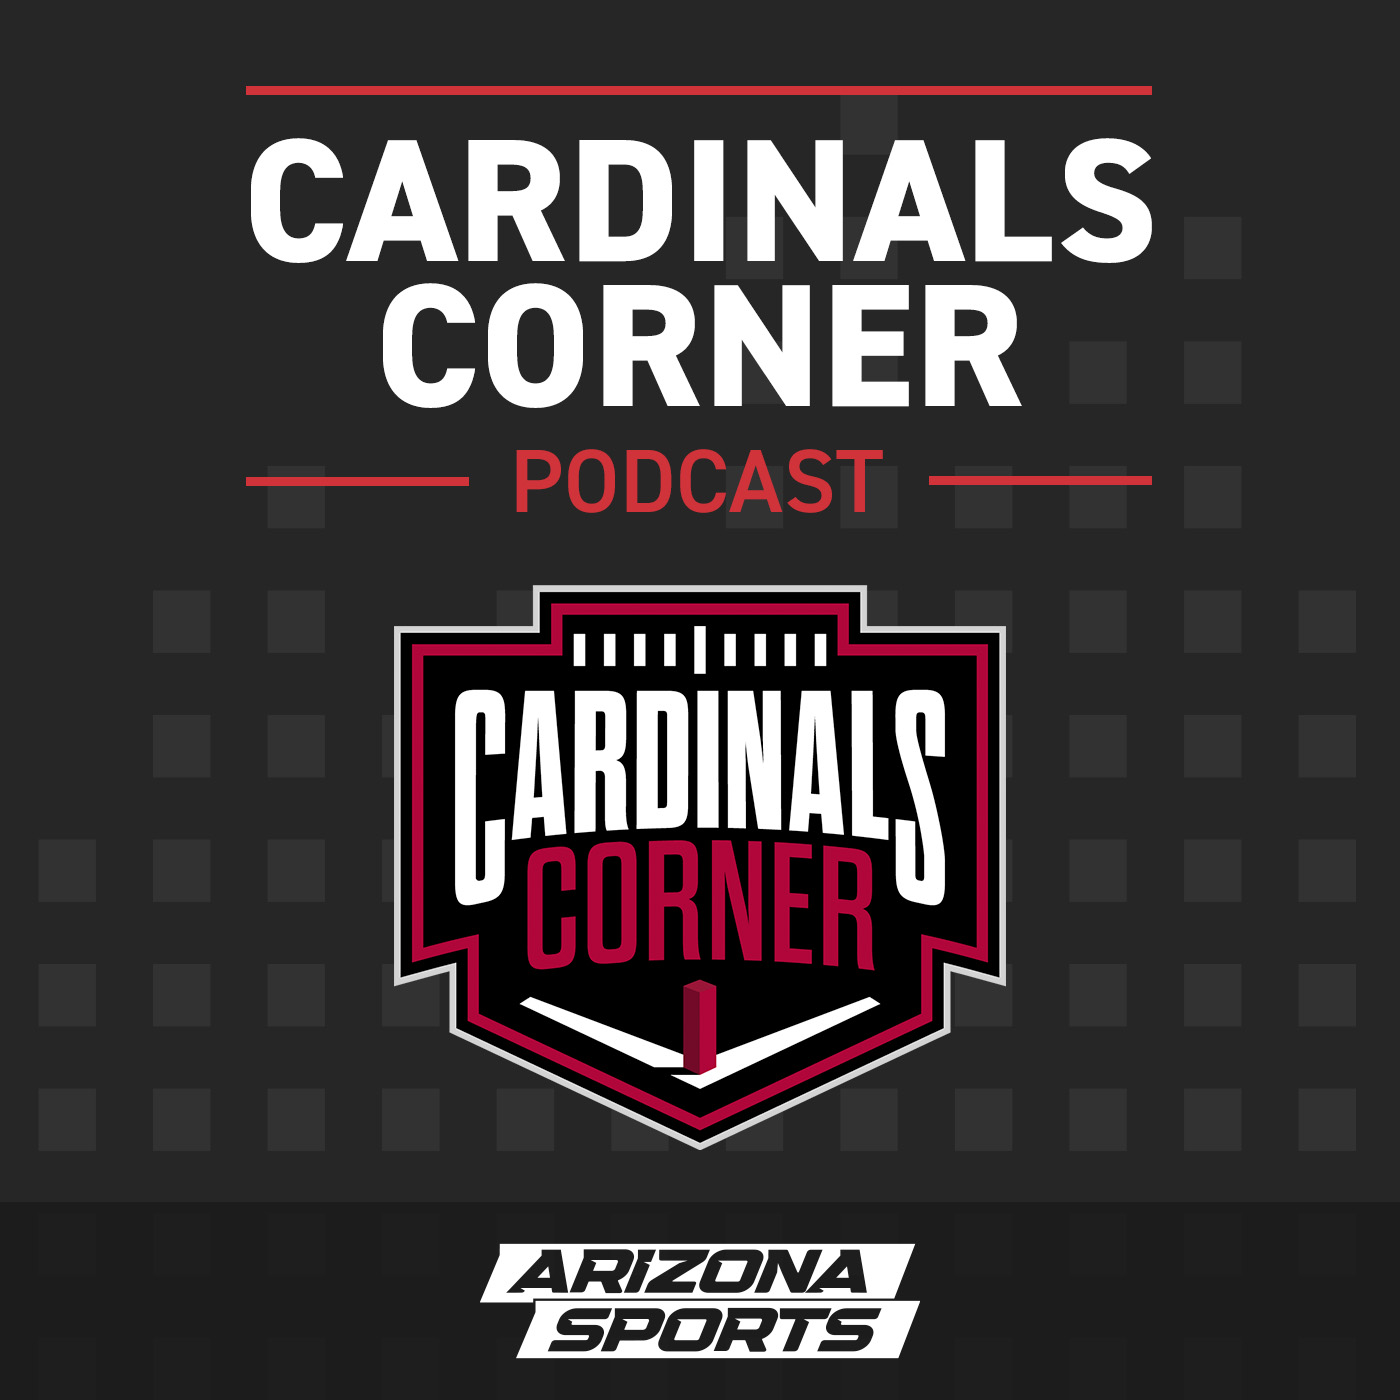 Arizona Cardinals get physical in their season-opening loss to the Washington Commanders - September 10